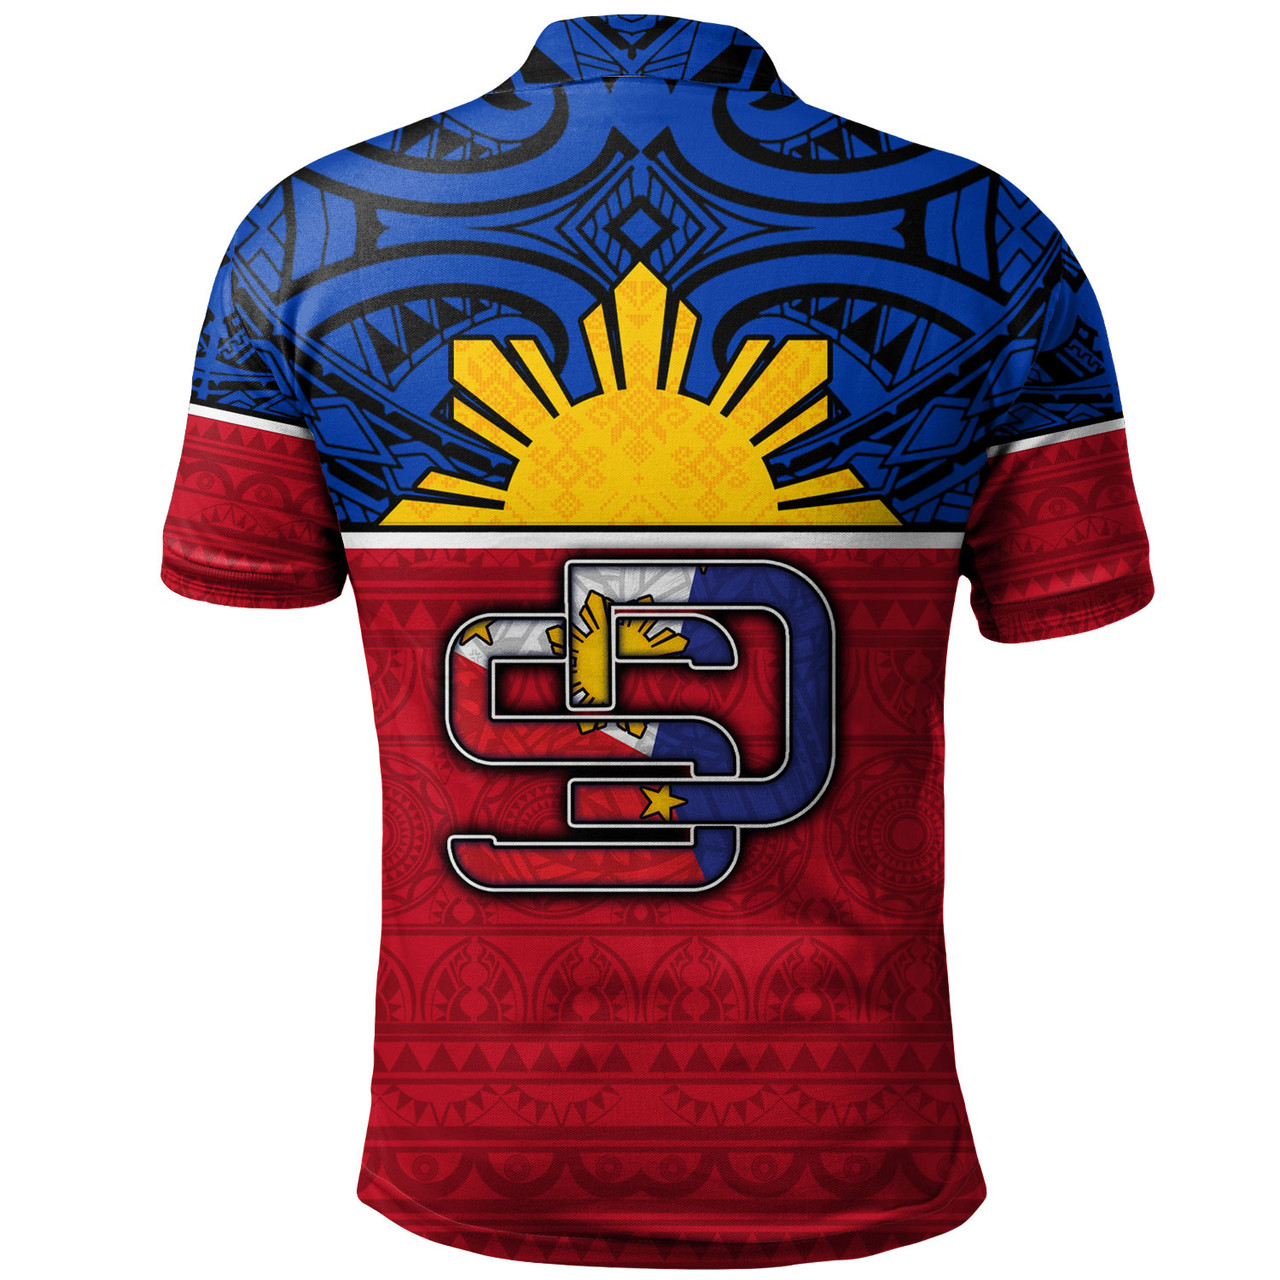 Philippines Filipinos Custom Personalised Polo Shirt San Diego Tribal Patterns Style